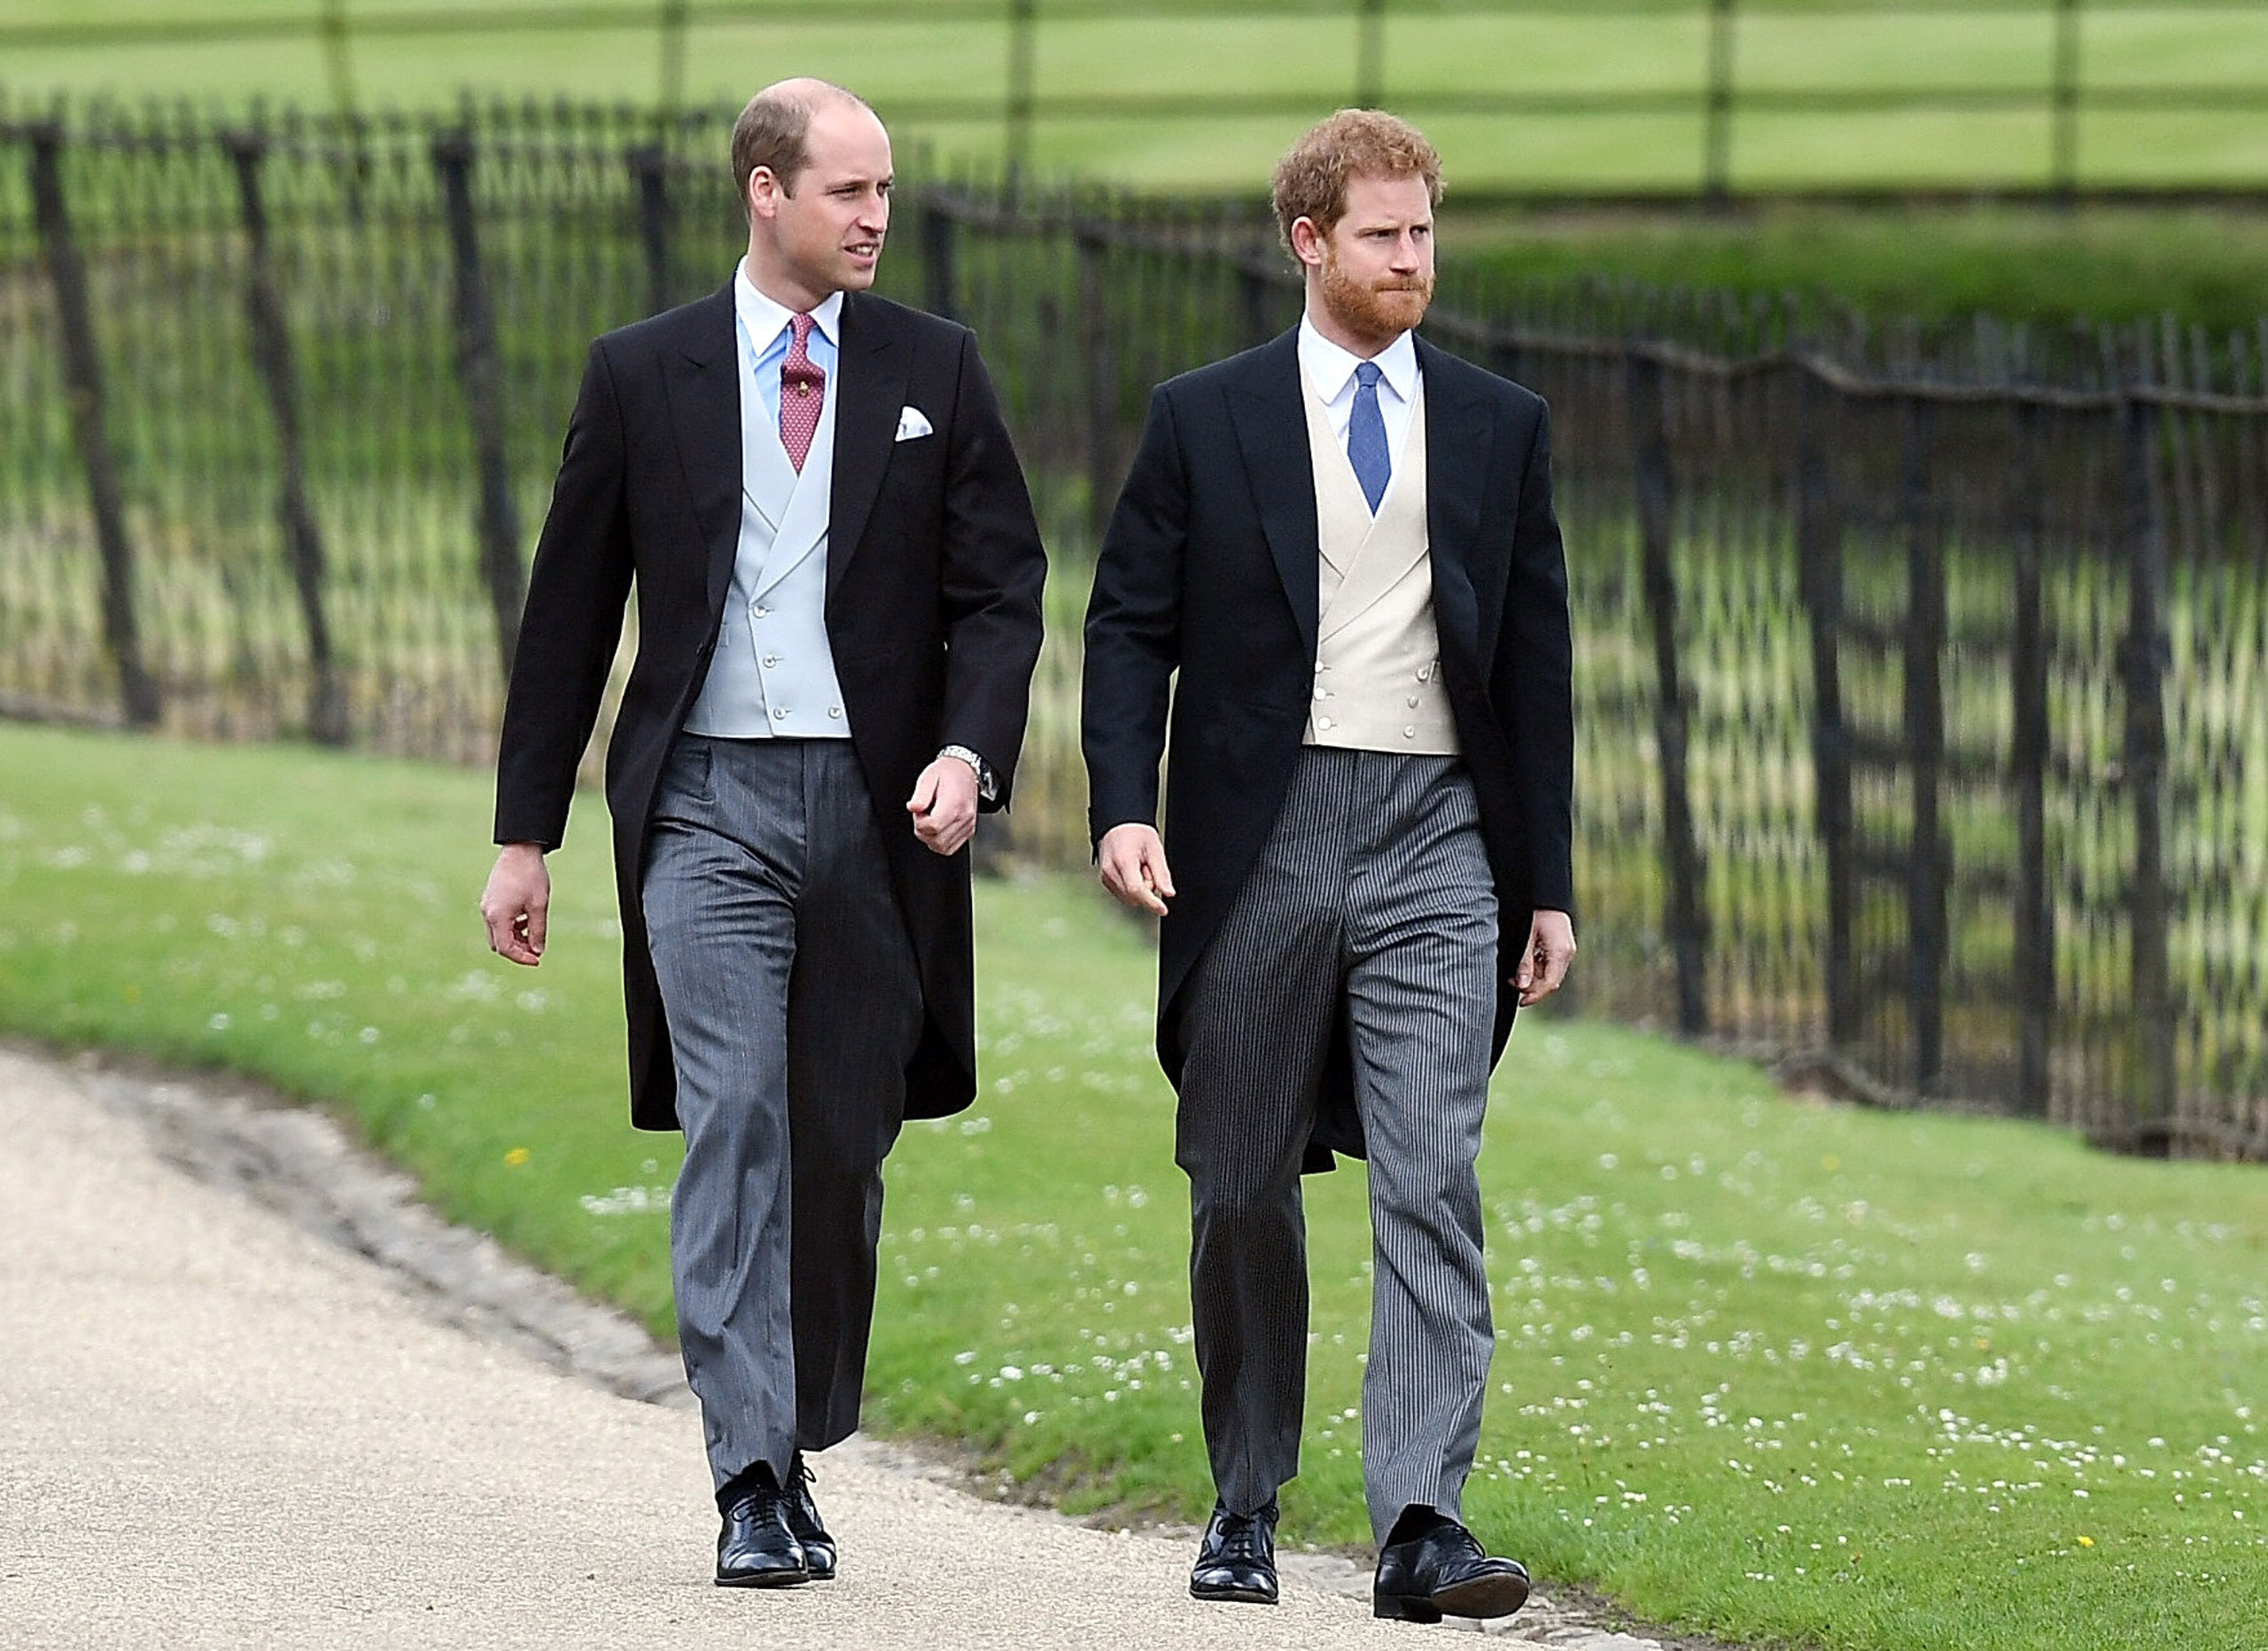 Prince William, Duke of Cambridge and Prince Harry attend the wedding of Pippa Middleton and James Matthews at St Mark's Church on May 20, 2017 in Englefield Green, England.